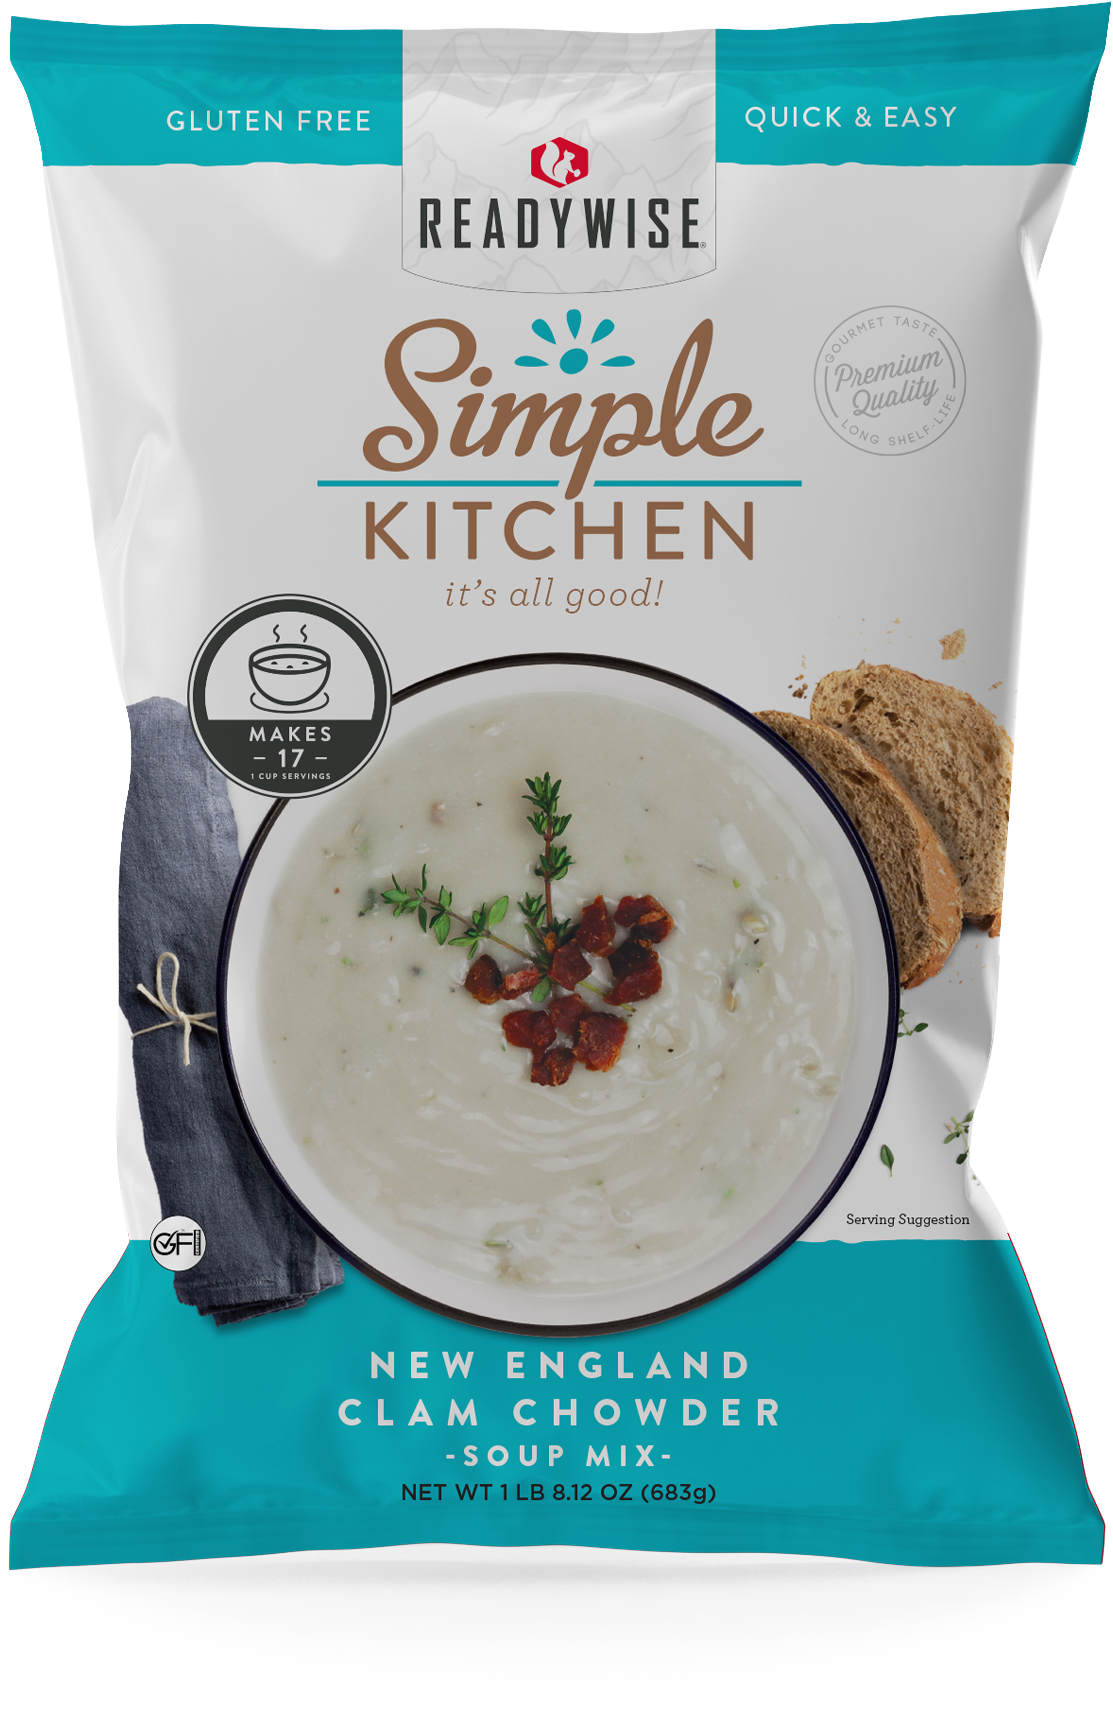 New England Clam Chowder Starter Soup Mix - 17 Servings